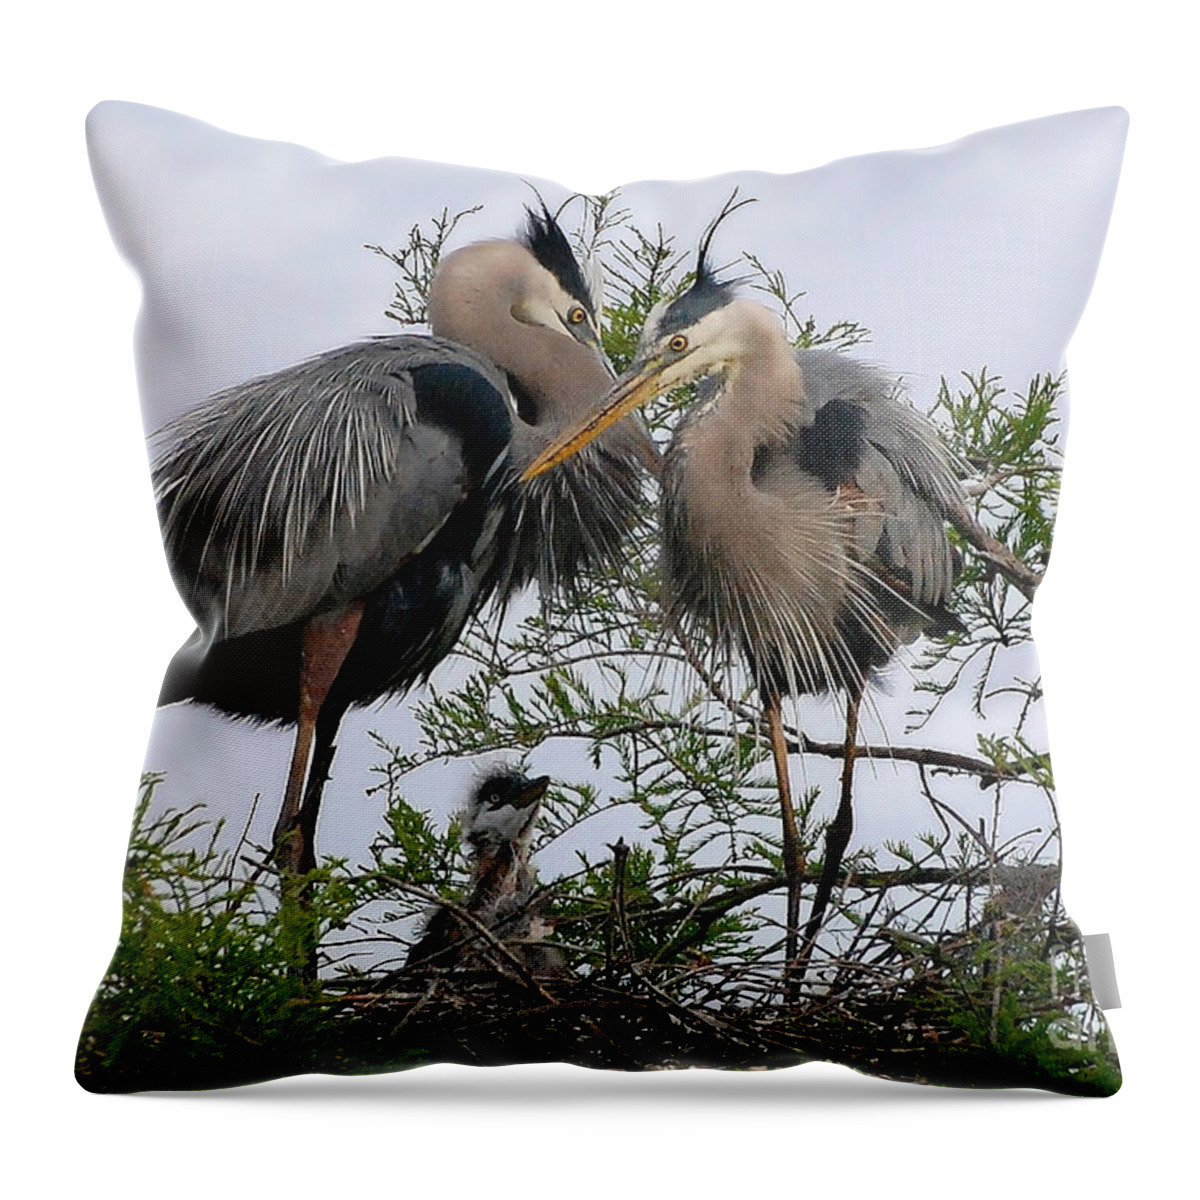 Birds Throw Pillow featuring the photograph Great Blue Heron Family by Kathy Baccari